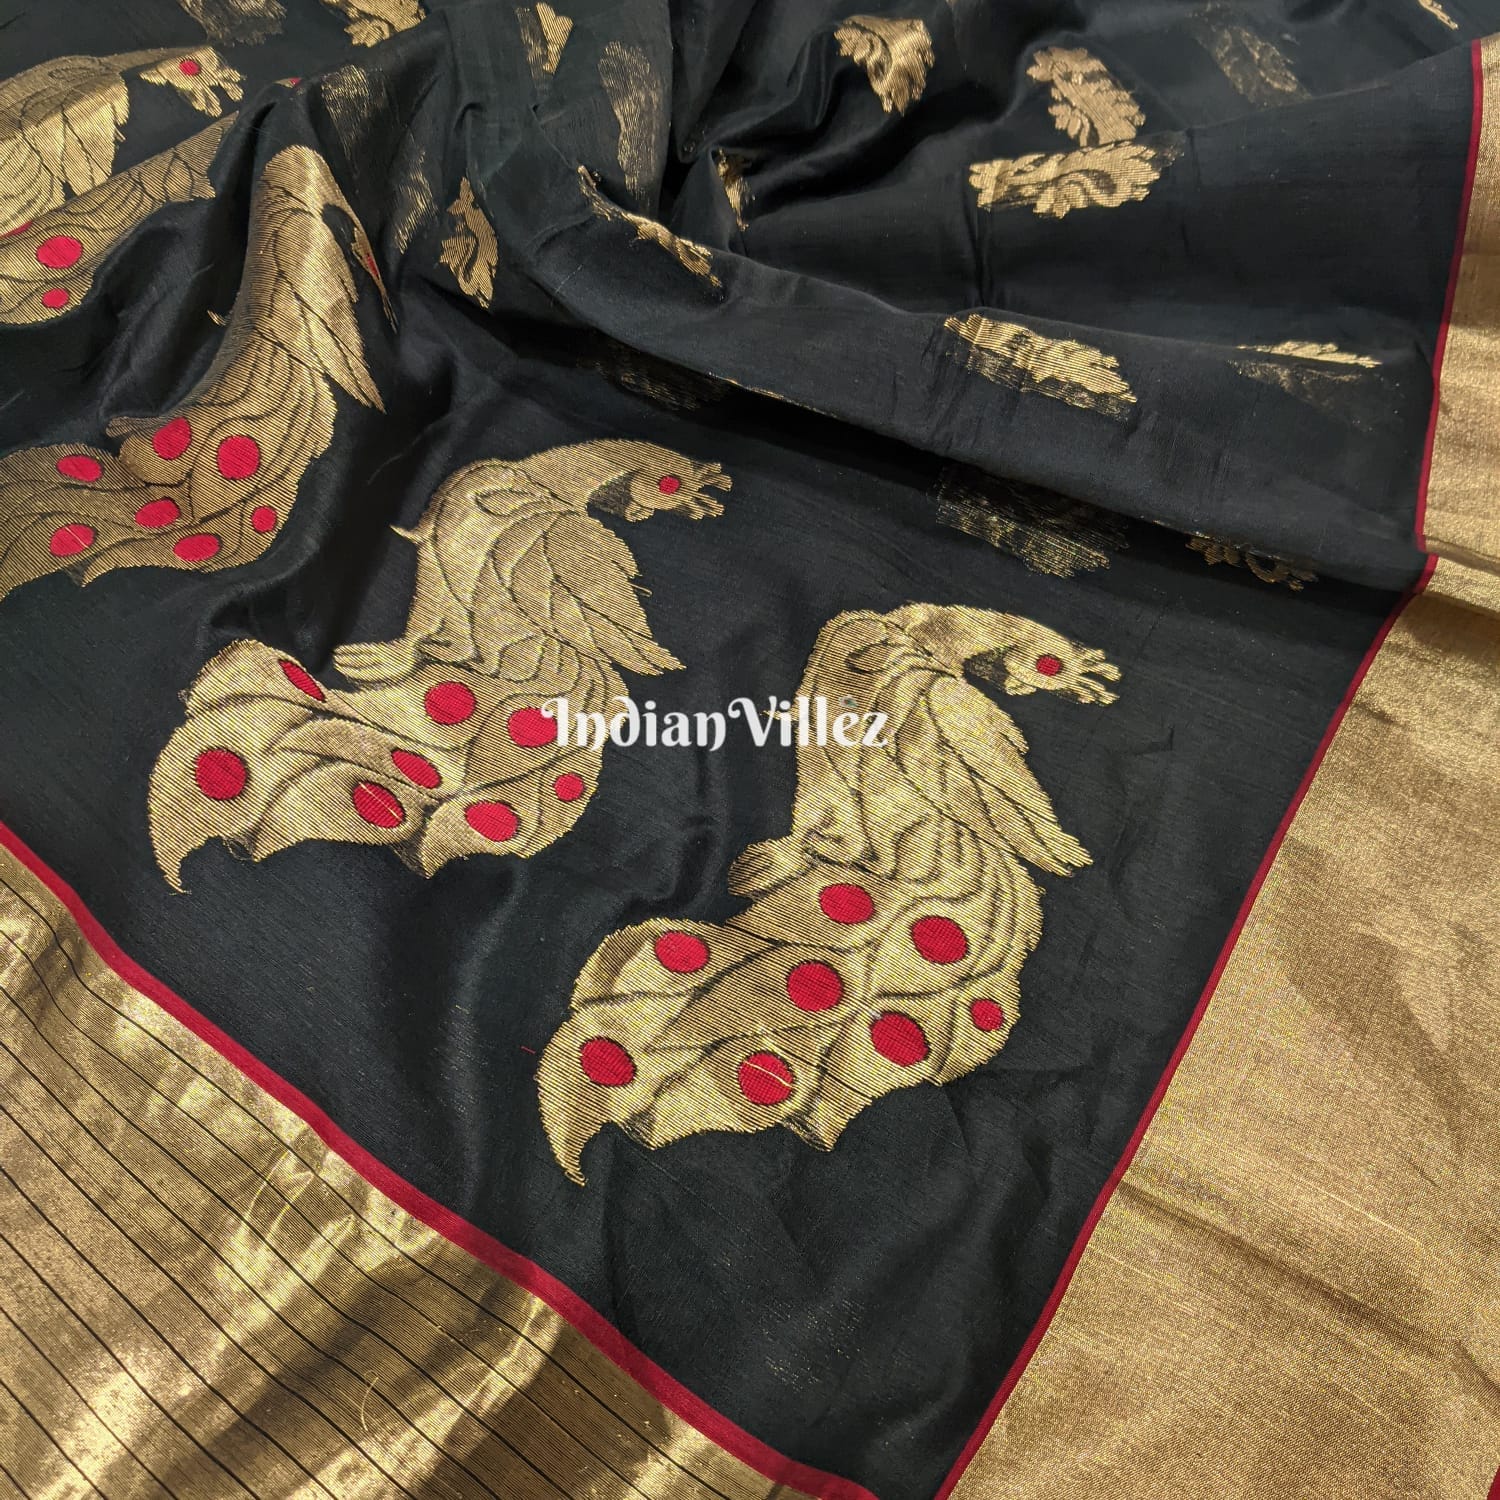 Buy Blue Sarees for Women by Indie Picks Online | Ajio.com